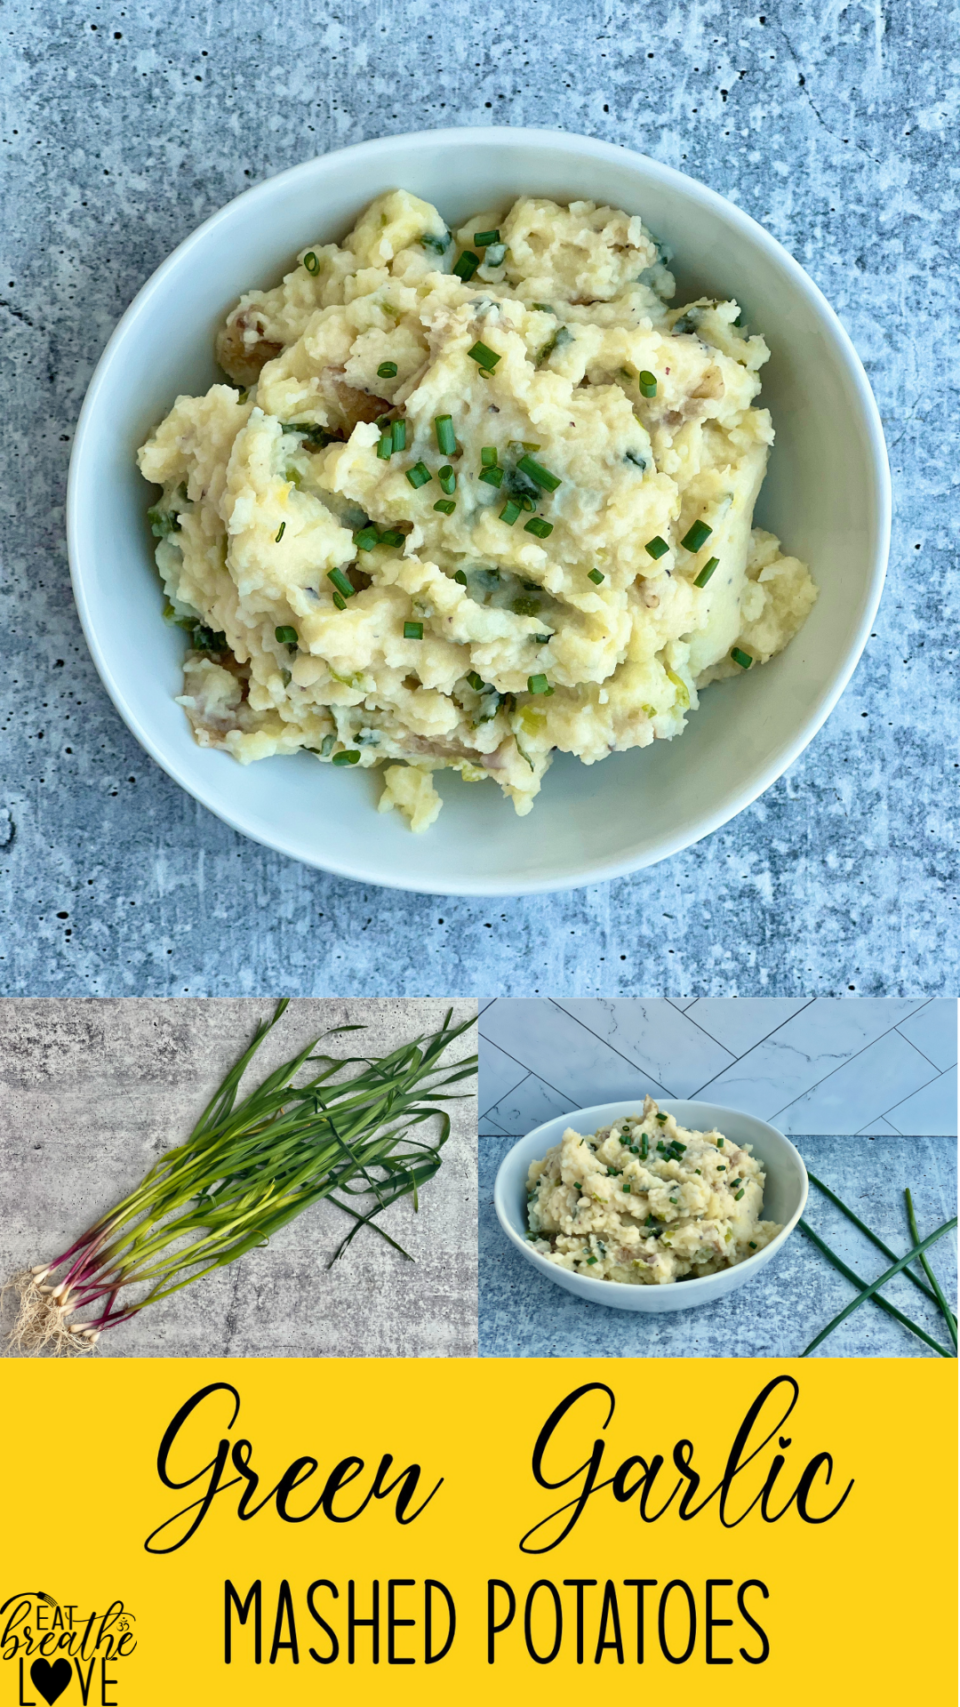 Pictures of green garlic and green garlic smashed potatoes